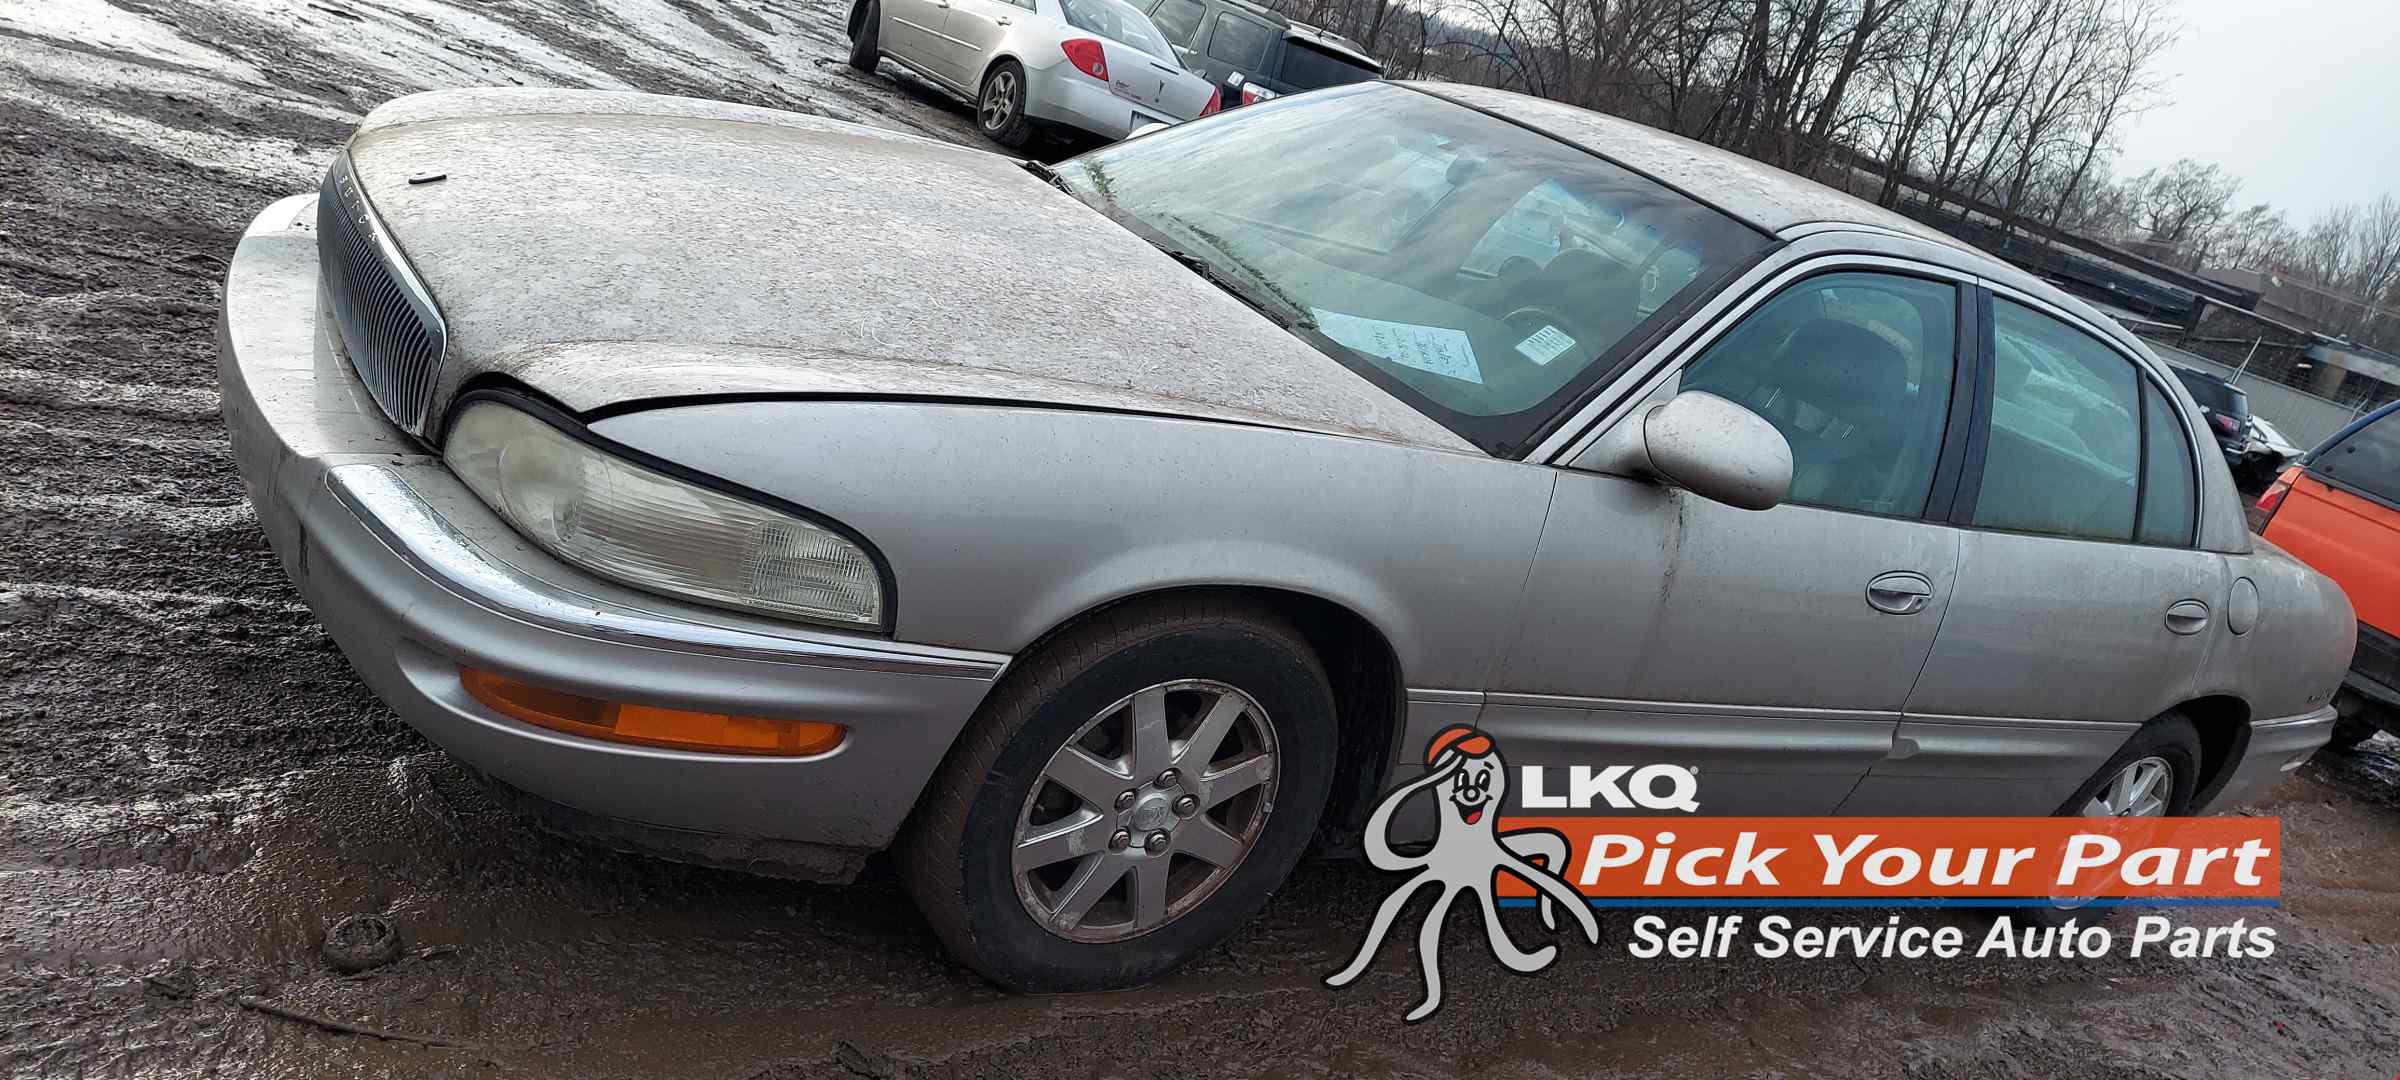 2004 Buick Park Avenue Used Auto Parts | South Bend